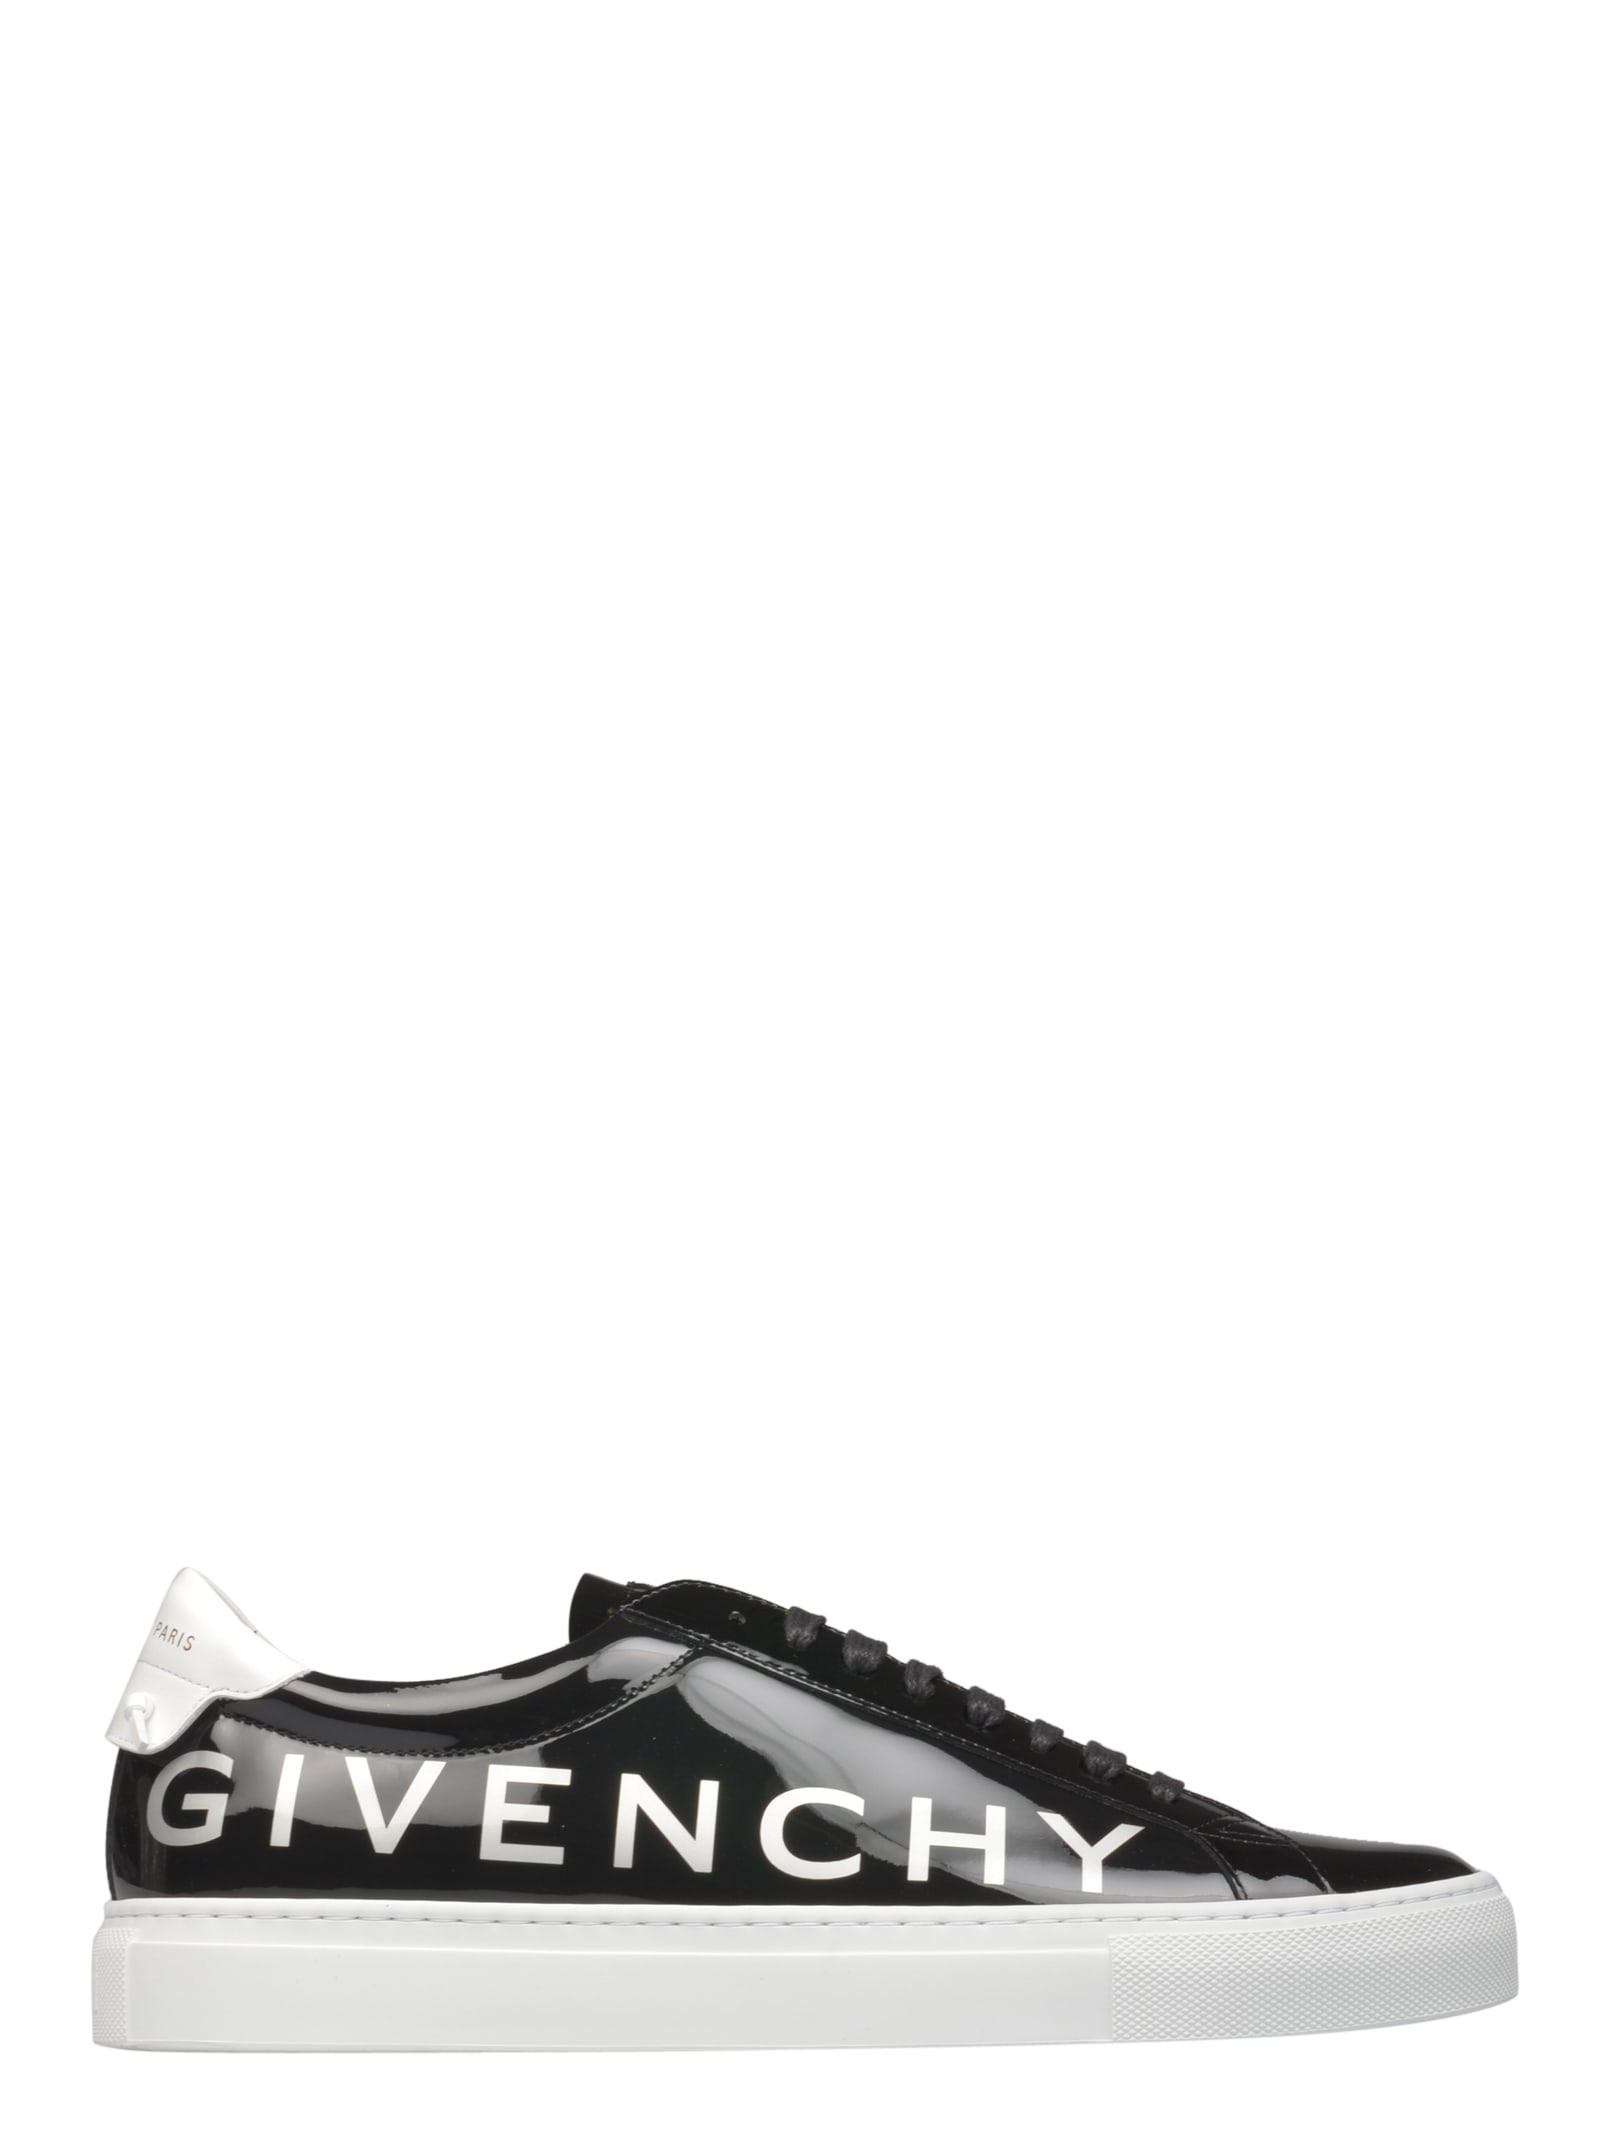 Givenchy Shoes | italist, ALWAYS LIKE A 